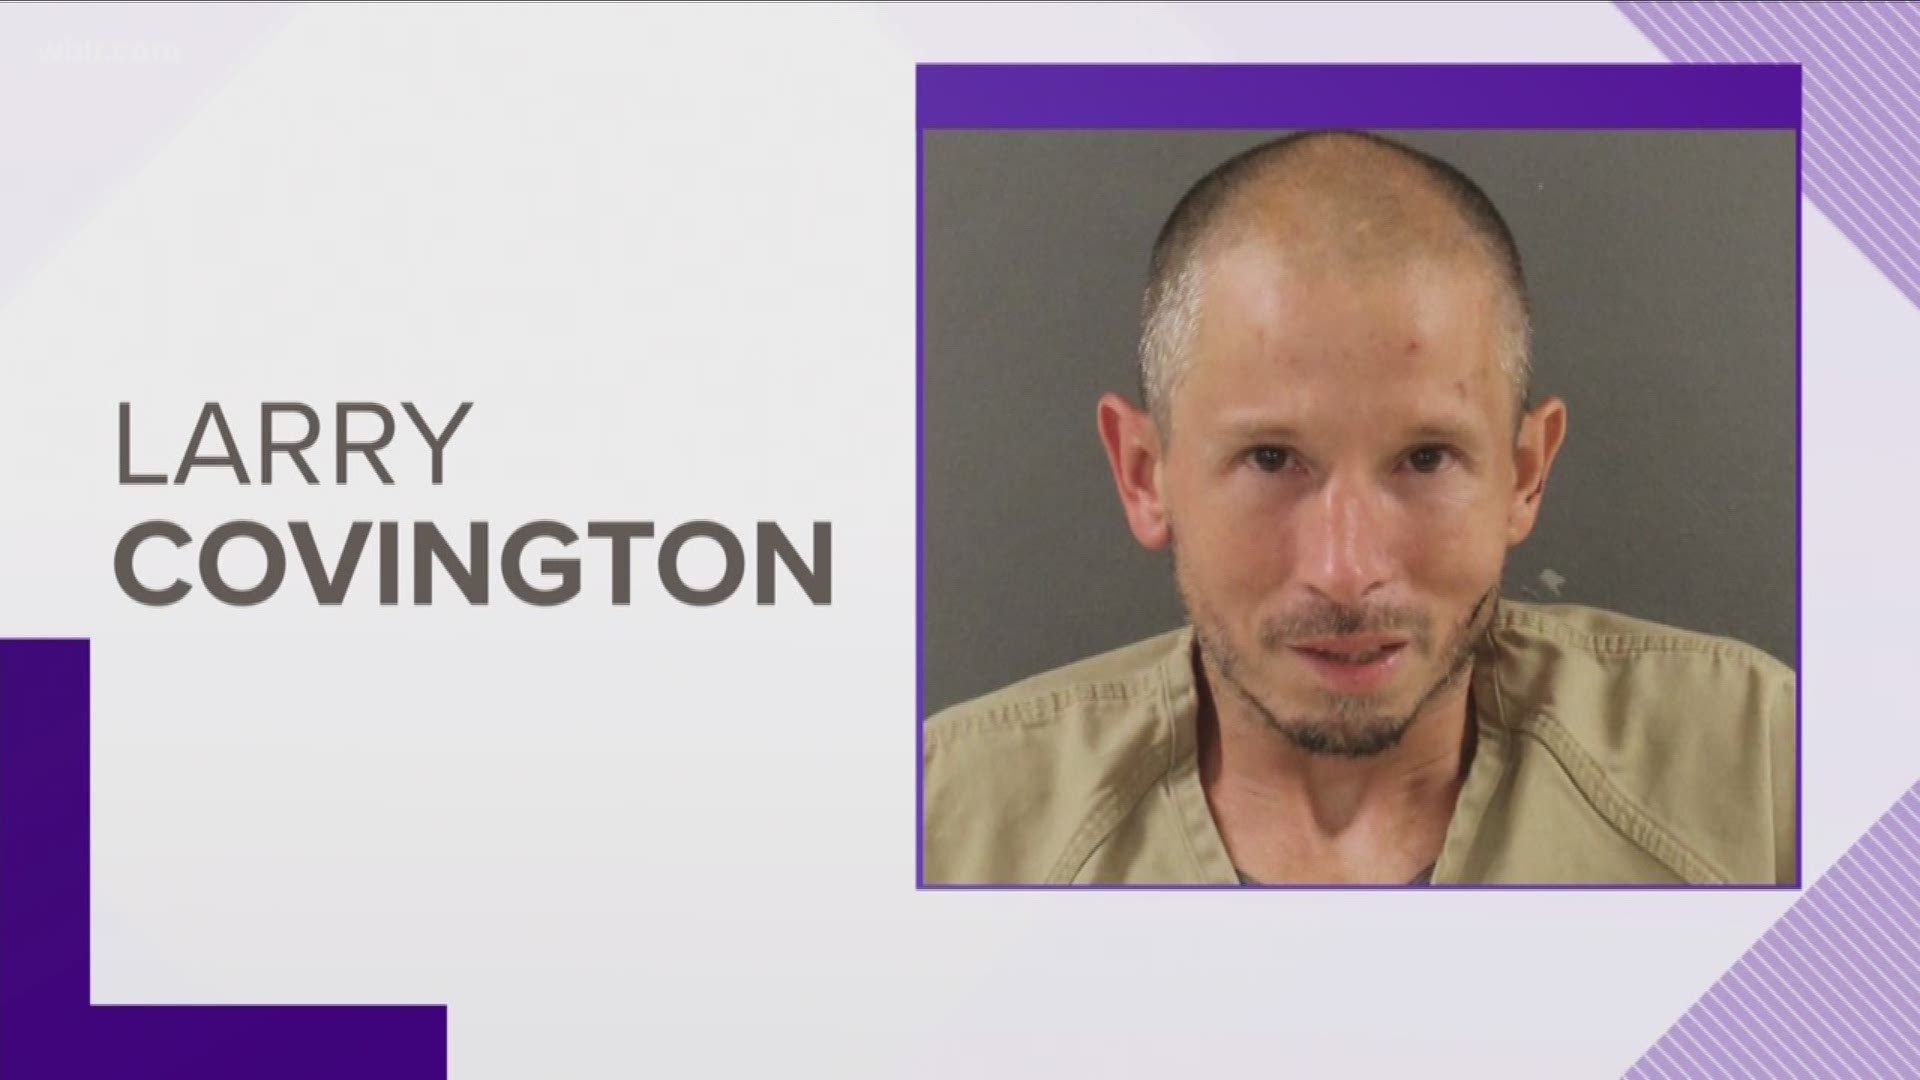 Larry Covington is now in jail following a manhunt with at least seven different law enforcement agencies. July 3, 2018.